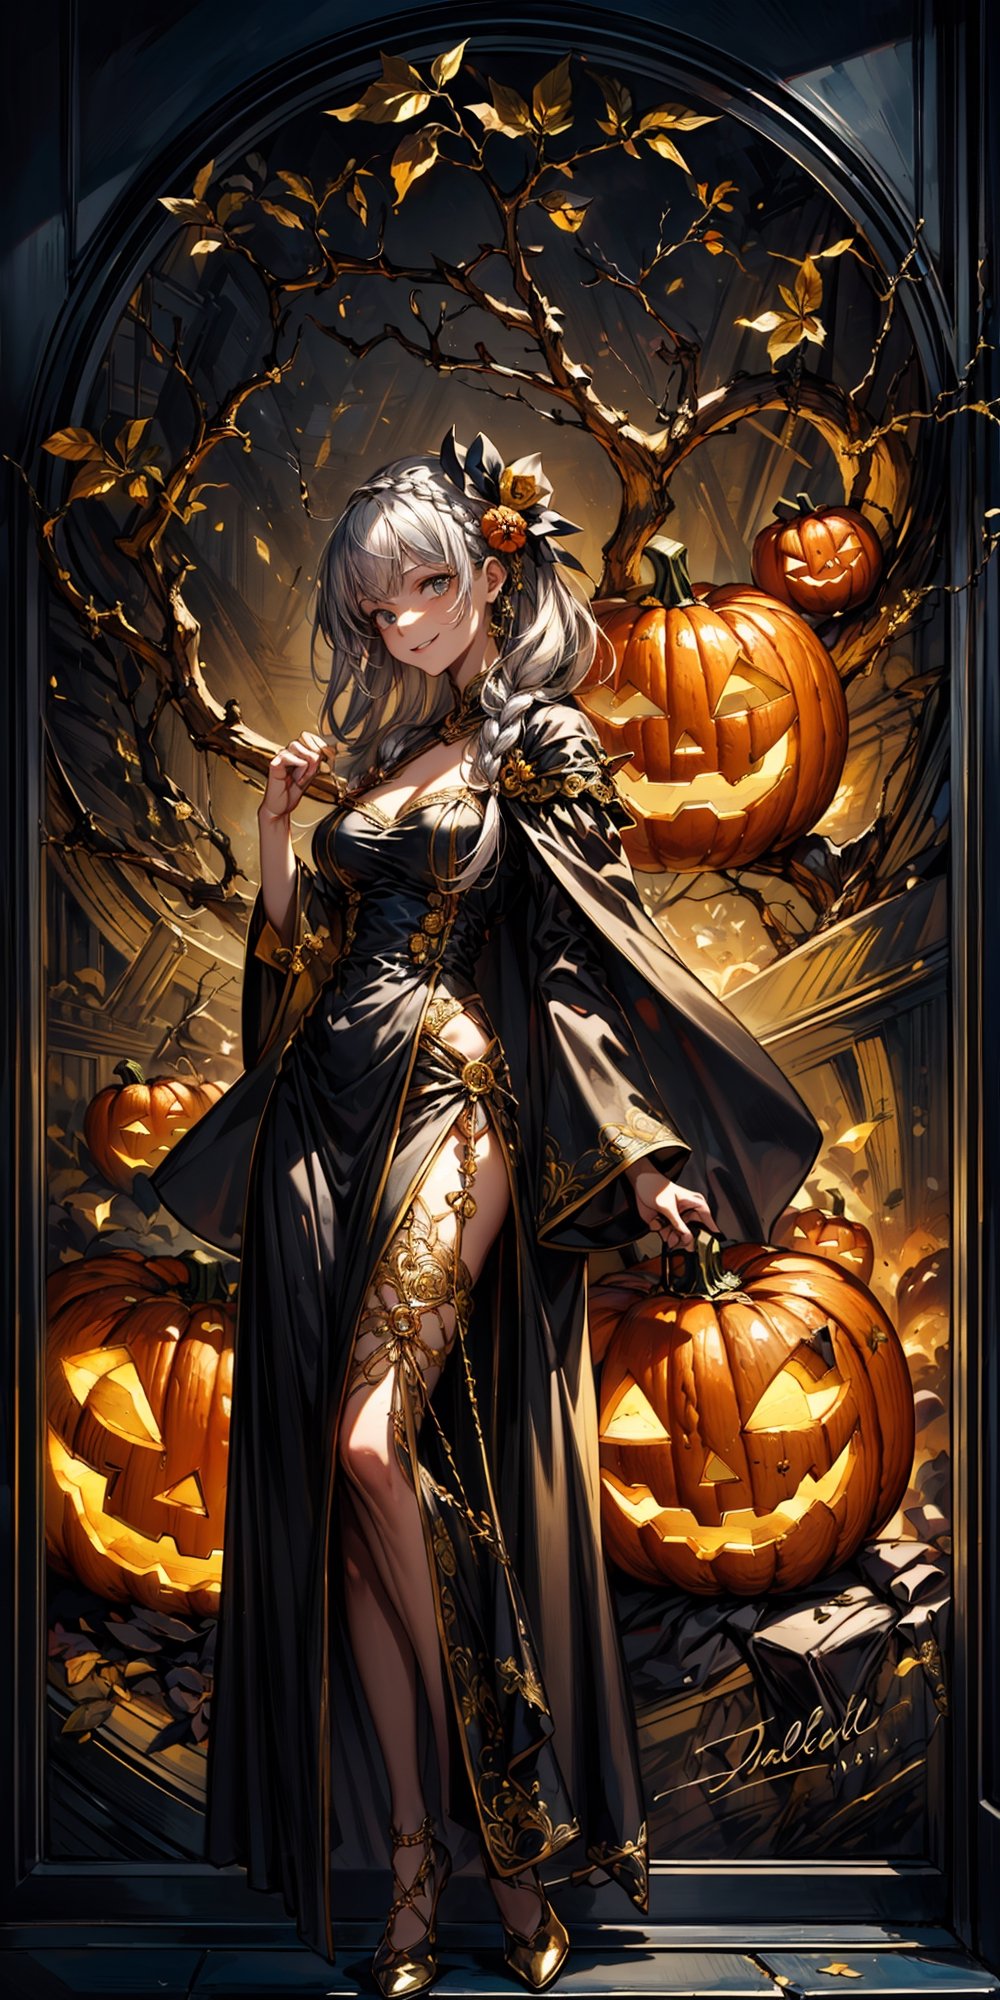 best quality,masterpiece,illustration,super detailed,High detail RAW photo,professional photograph,ultra-detailed,8k wallpaper,extremely detailed CG,official art,
cute girl, beautiful and aesthetic, (tangle, entangle, zentangle, Jack O'Lanterns ), masterpiece, concept art, (art nouveau:1.1), ultra detailed,
detailed , witch,(french braid:1.1), silver hair, smile,Jack O'Lanterns , embroidered cape, sorcerer robe,hair ornament, limited palette, (gold theme:1.2), Jack O'Lanterns   theme, Jack O'Lanterns silhouette in background, Jack O'Lanterns ornaments, bottle, Jack O'Lanterns 